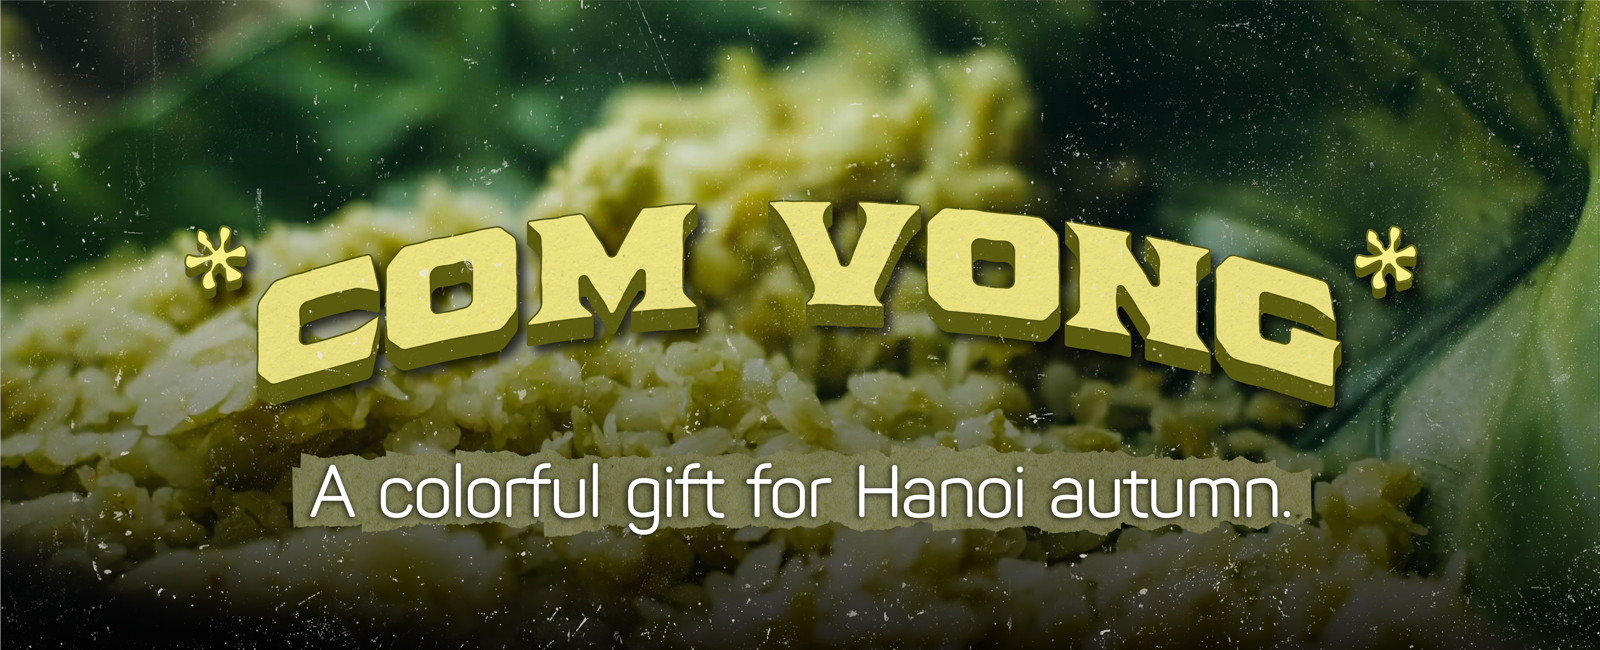 Com Vong - A colorful gift for Hanoi autumn